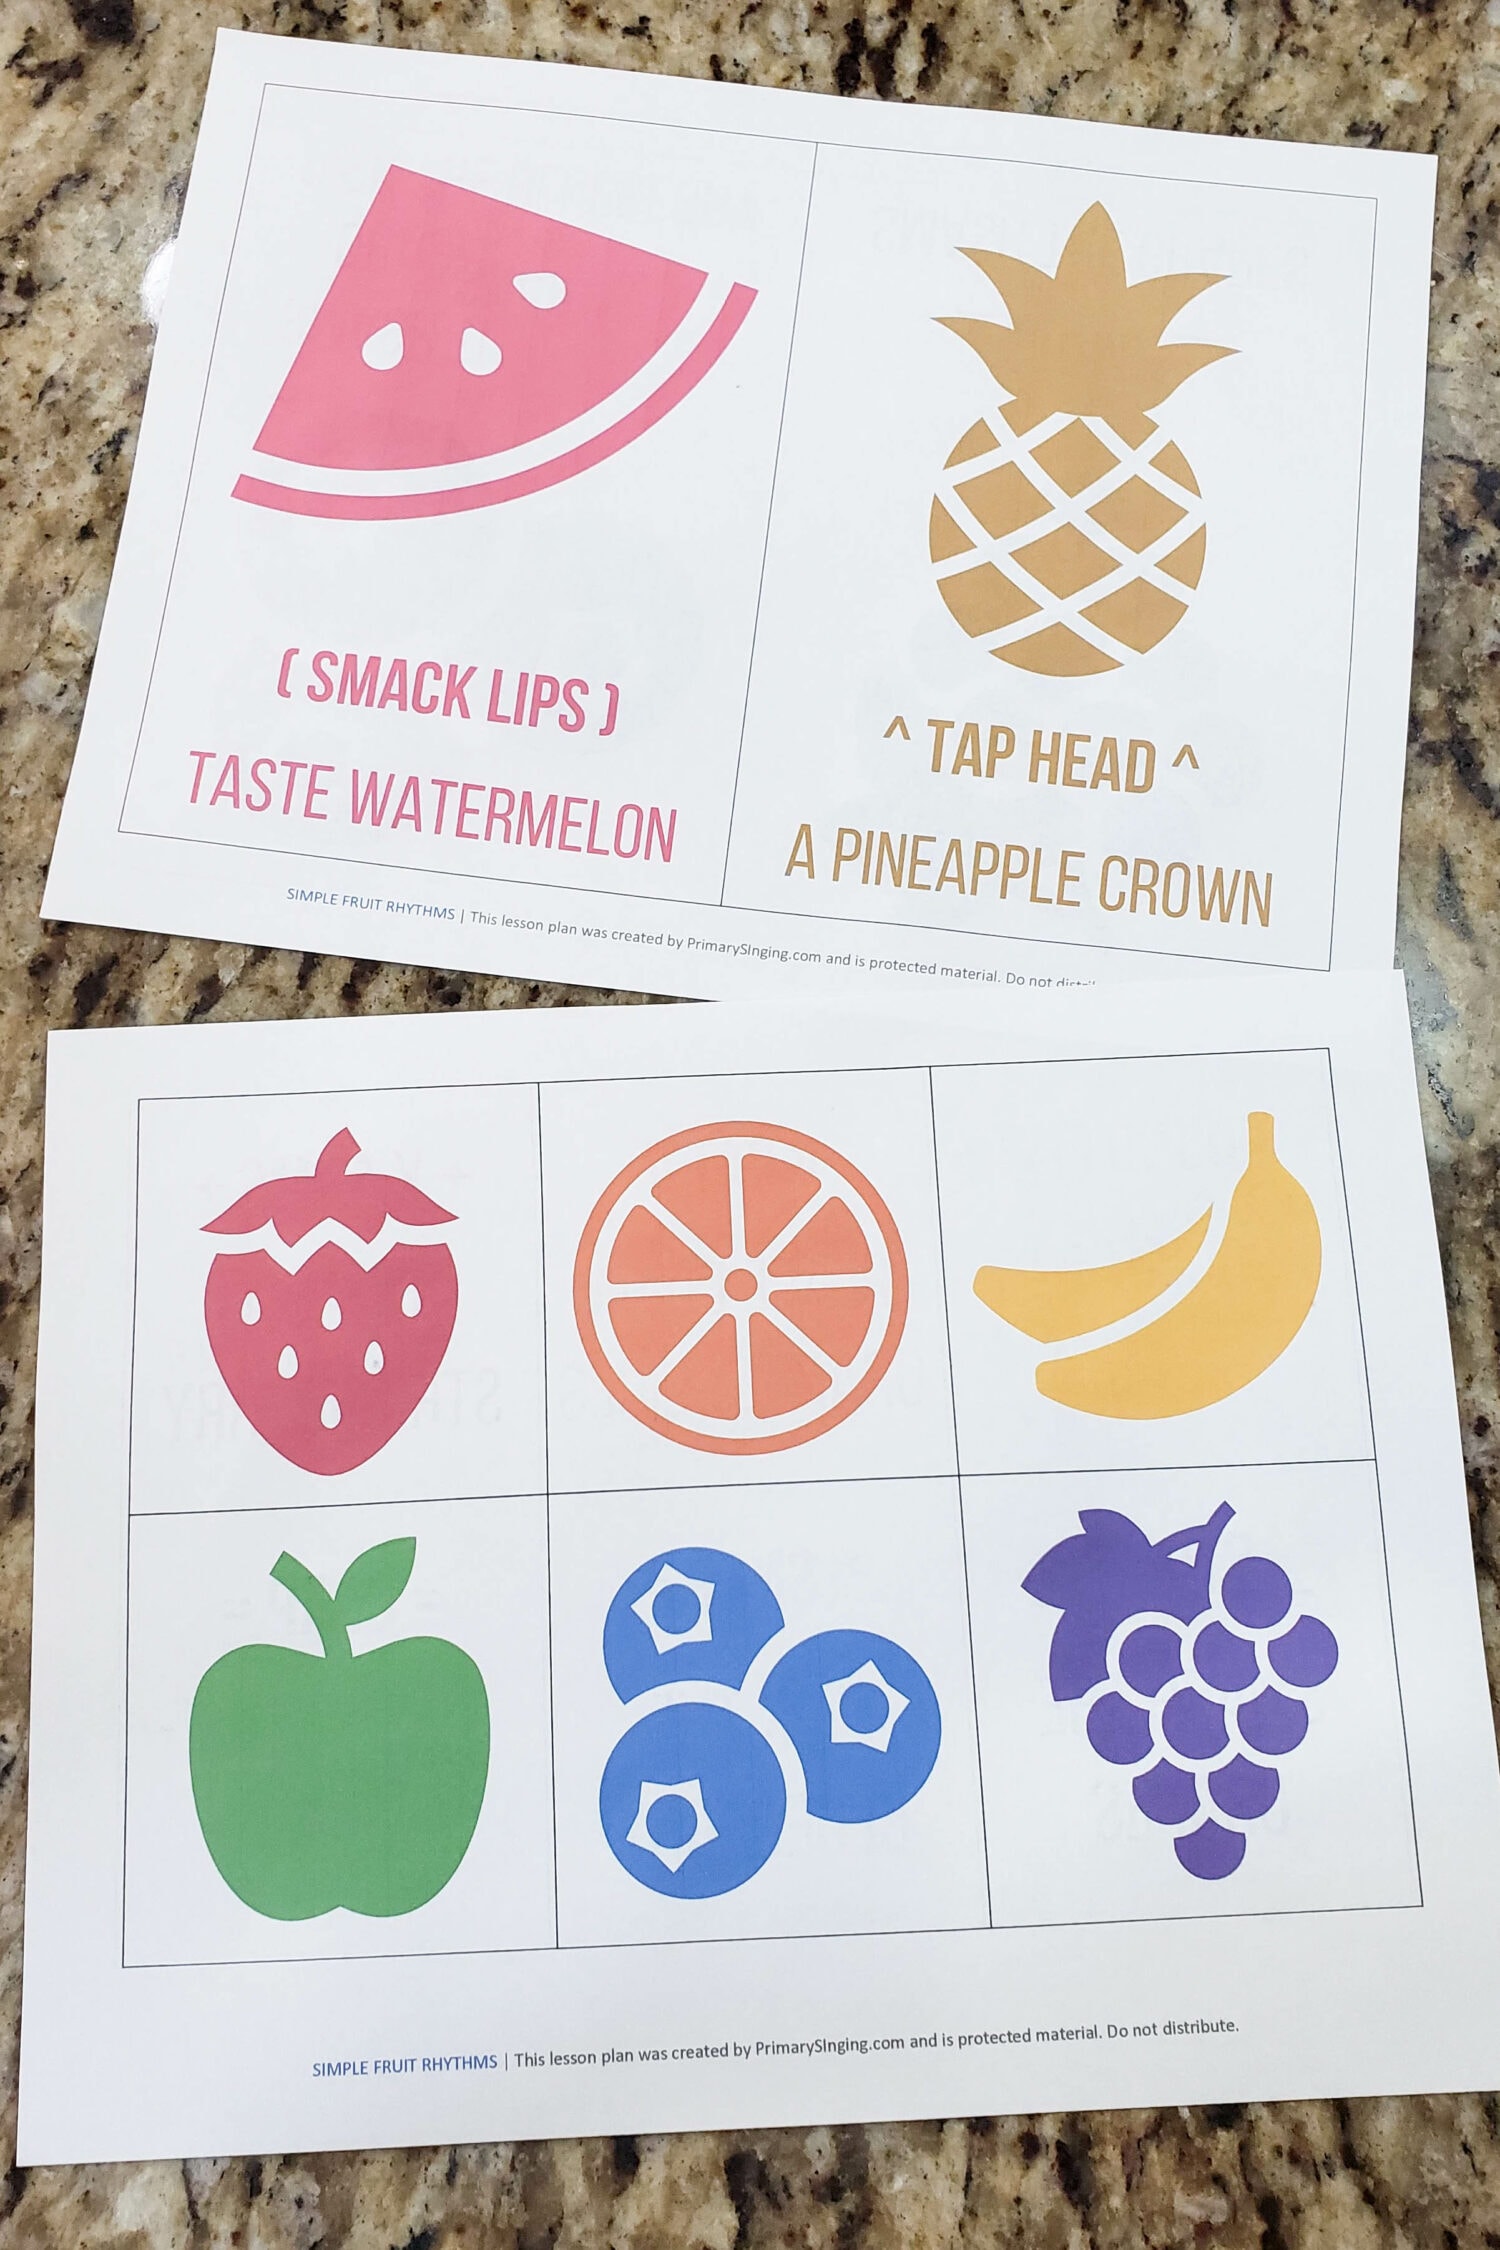 Play a fun game of Fruit Ninja in singing time with these flexible Fruit Rhythm Patterns printable cards that match with an action, color, and even a shape to use with any Primary song. Great for any music leaders. 